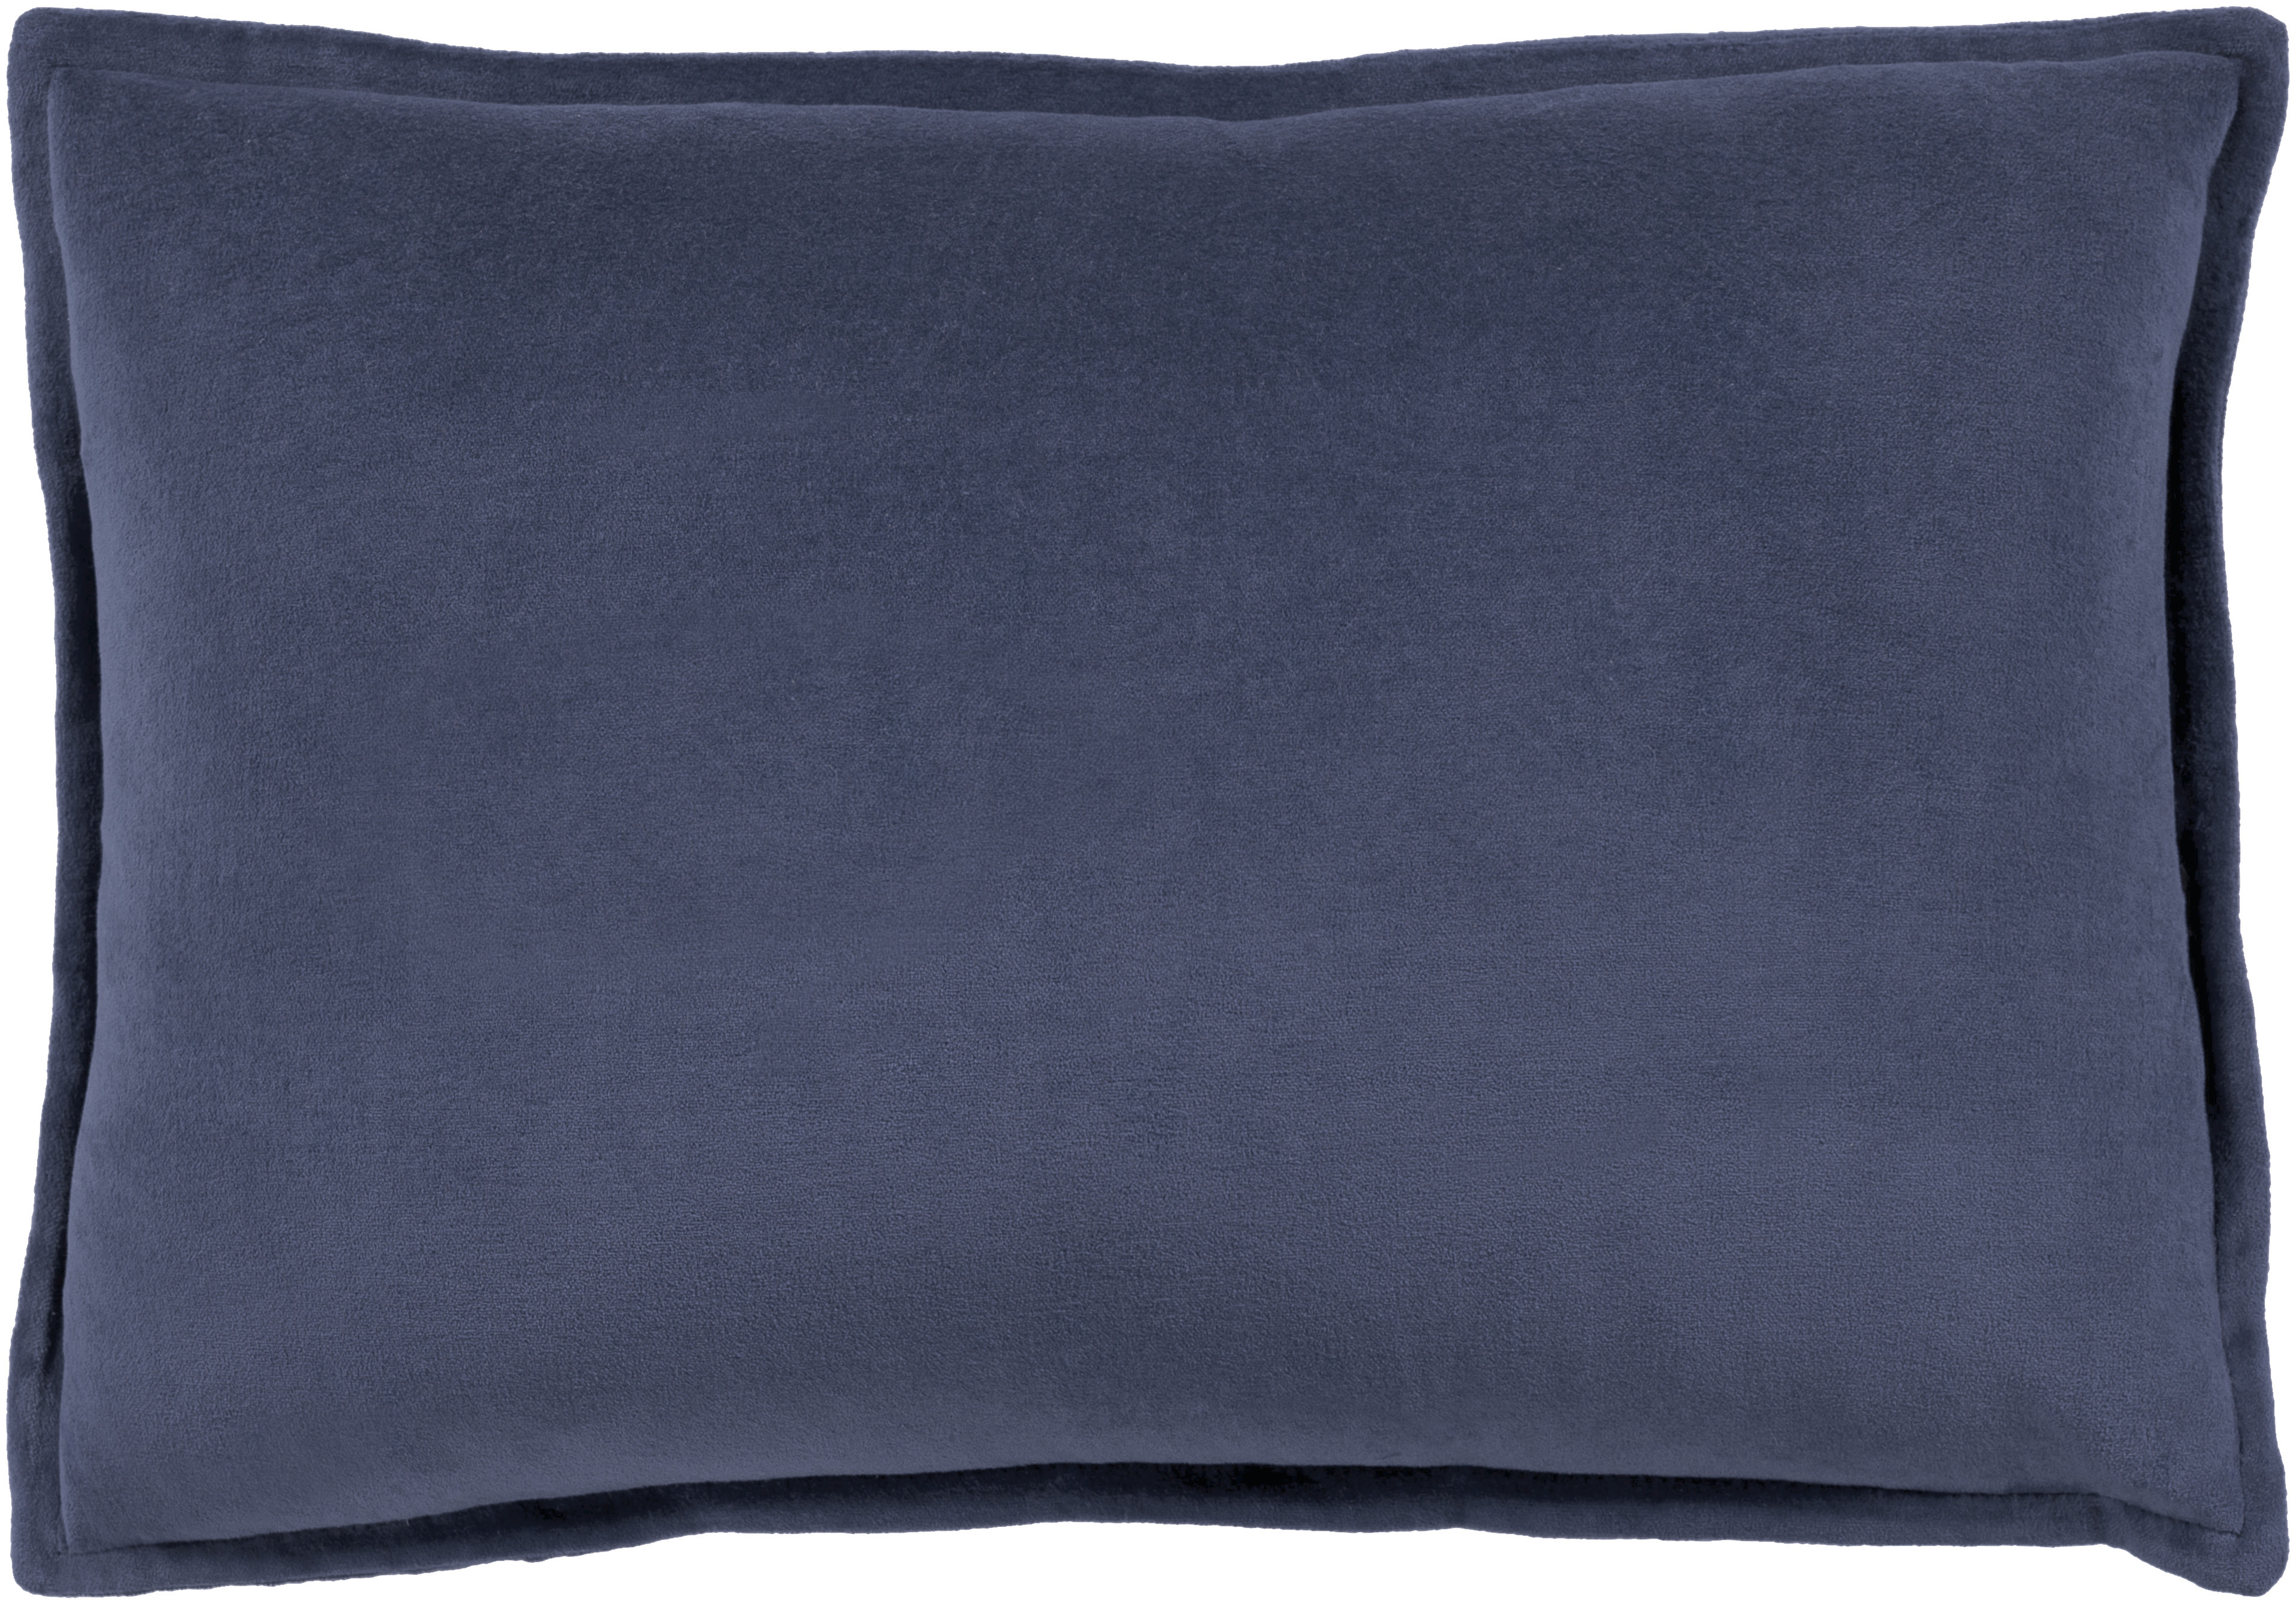 Cotton Velvet Throw Pillow, Small, pillow cover only - Surya